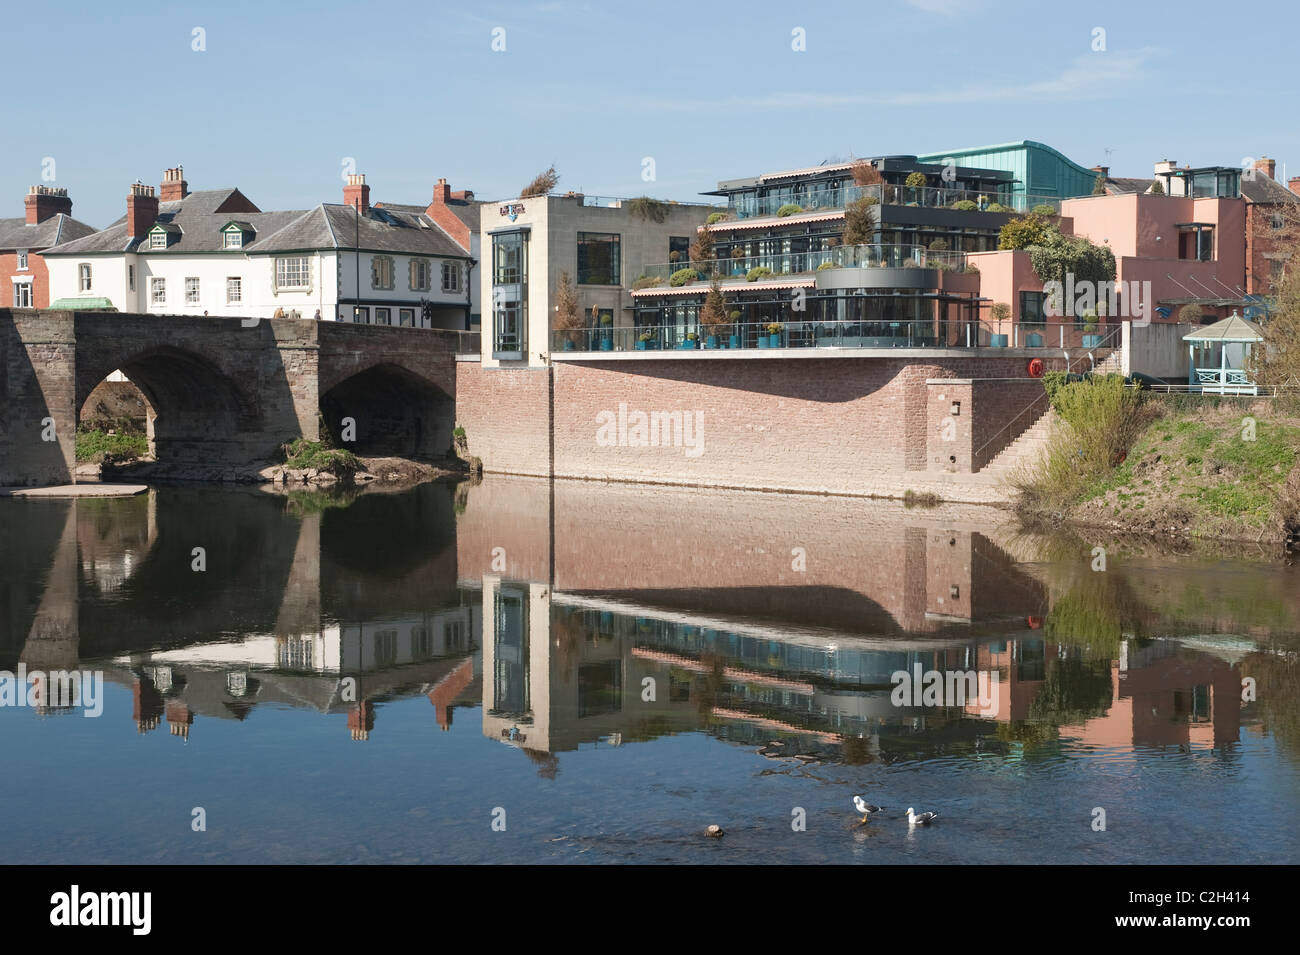 Fiume Wye a Hereford Foto Stock